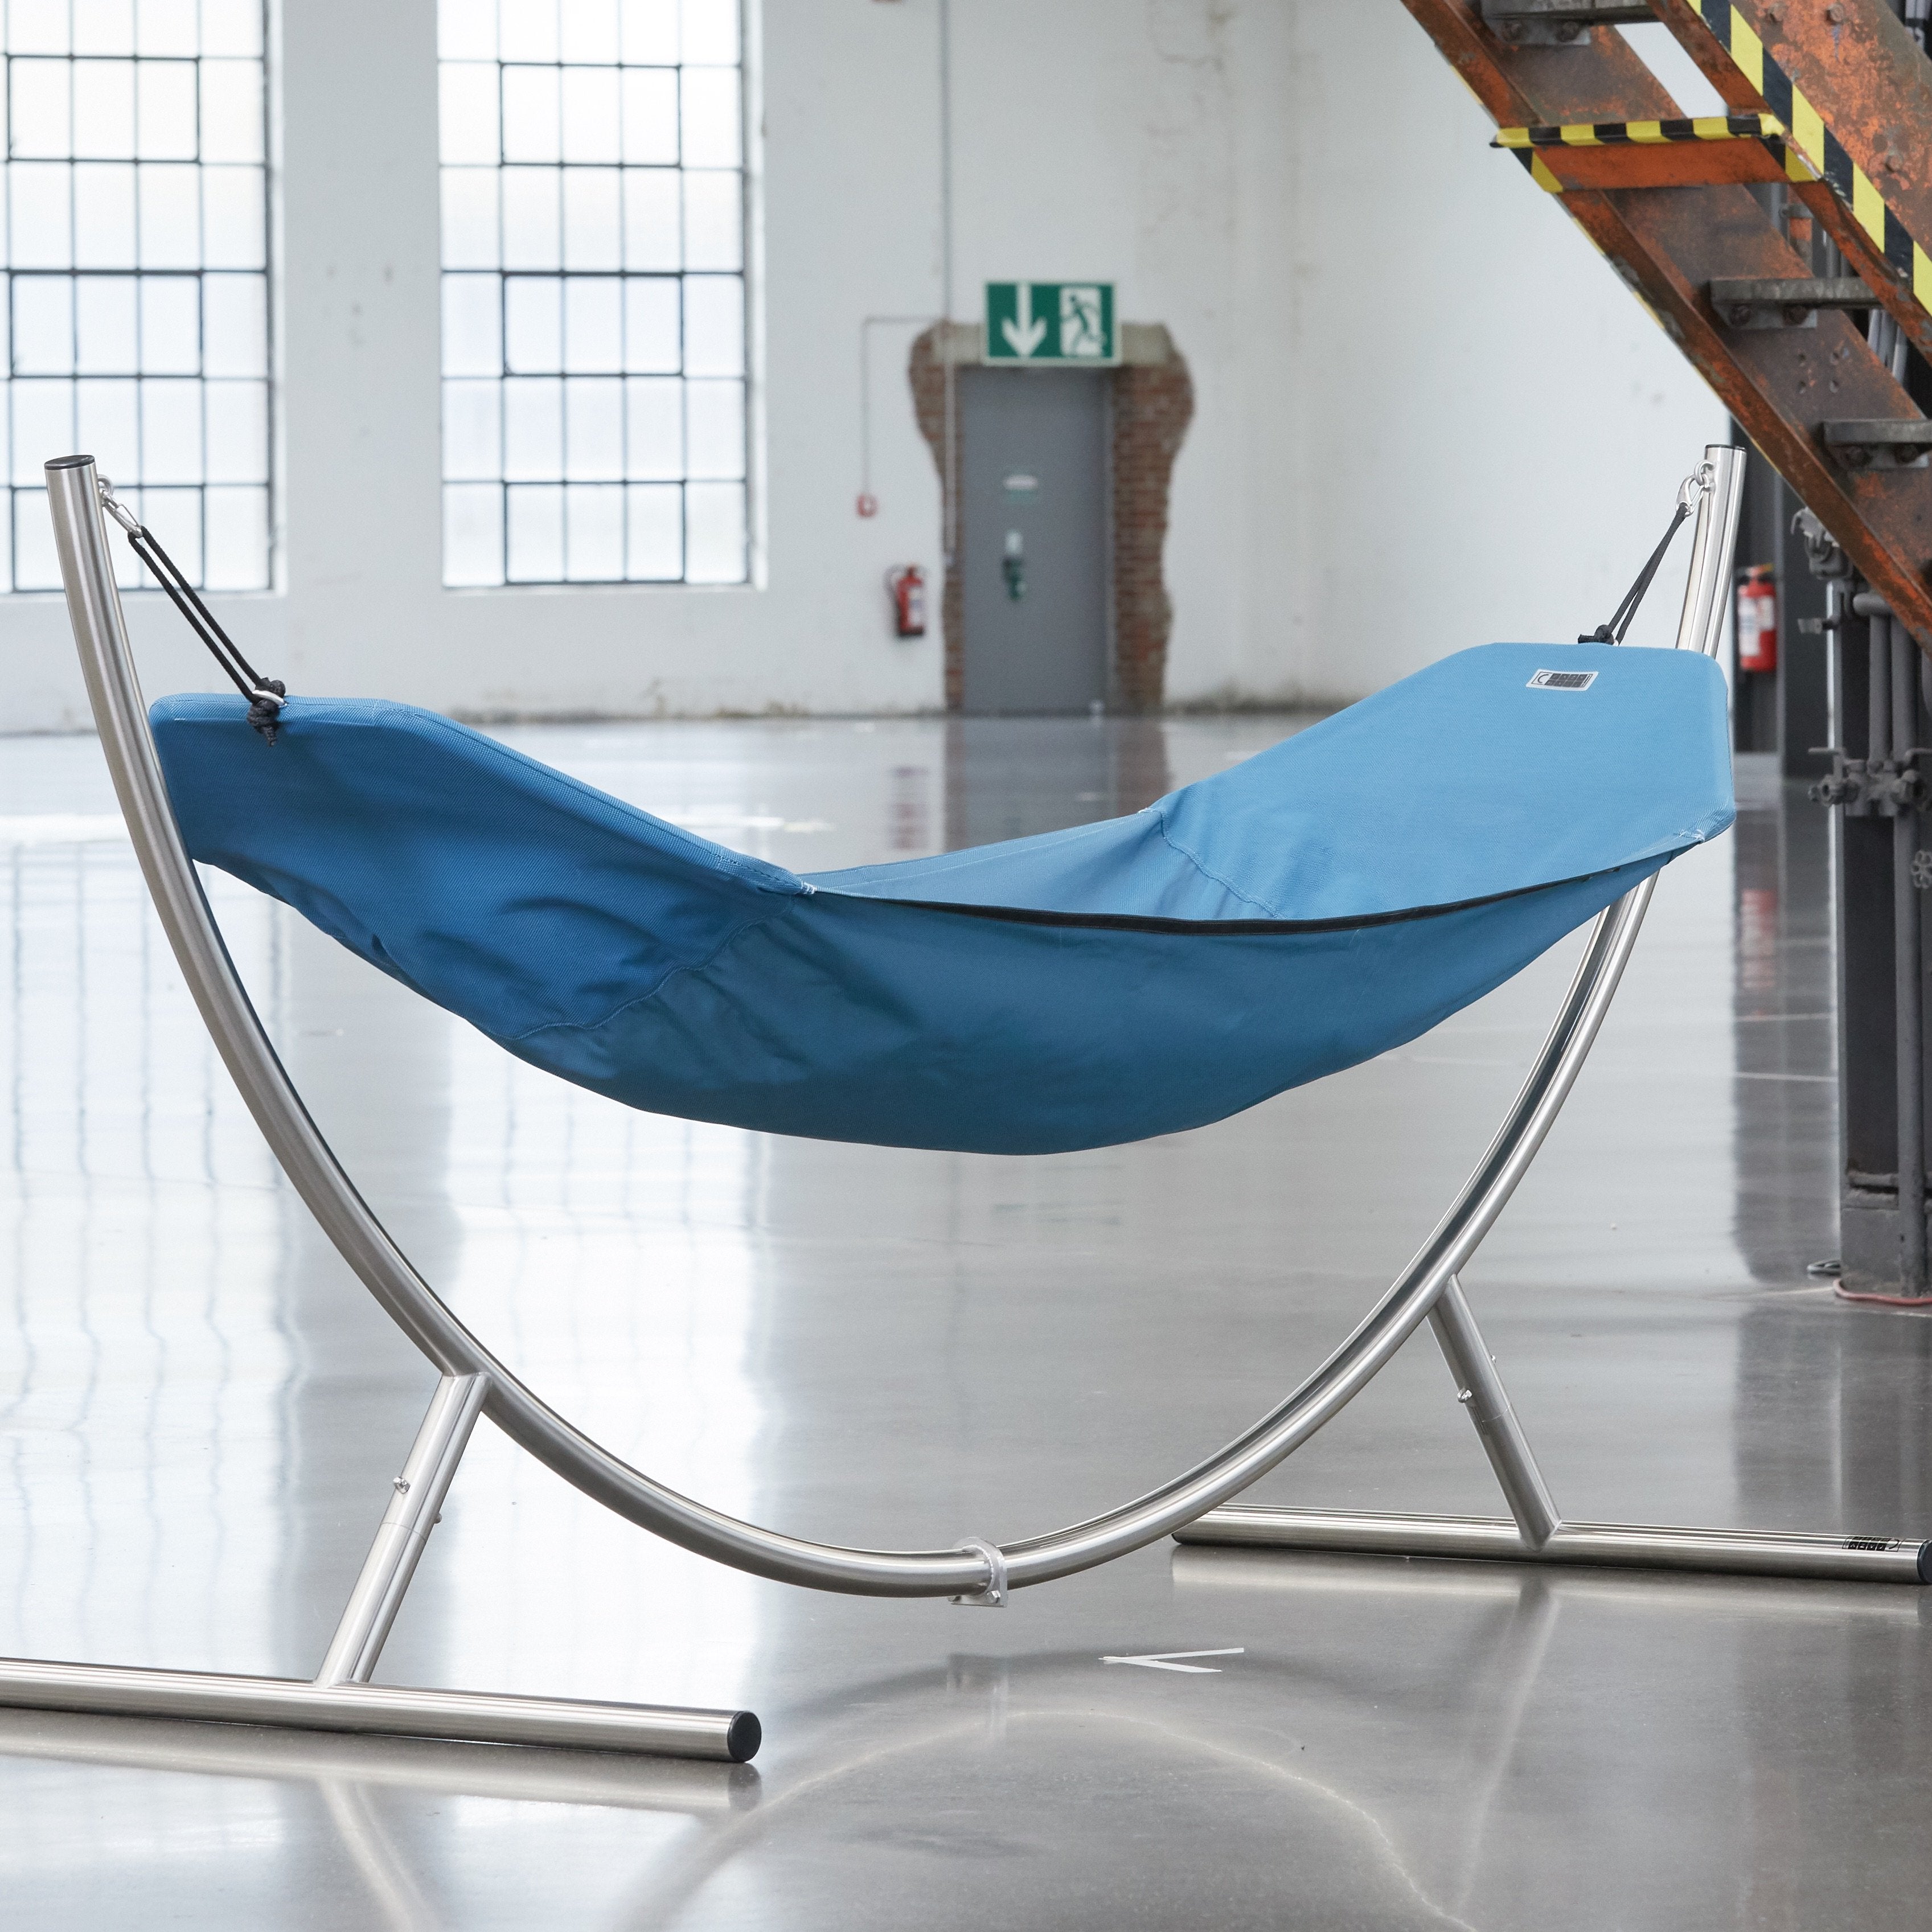 CrazyChair LUNO hammock stand, stainless steel, German production.